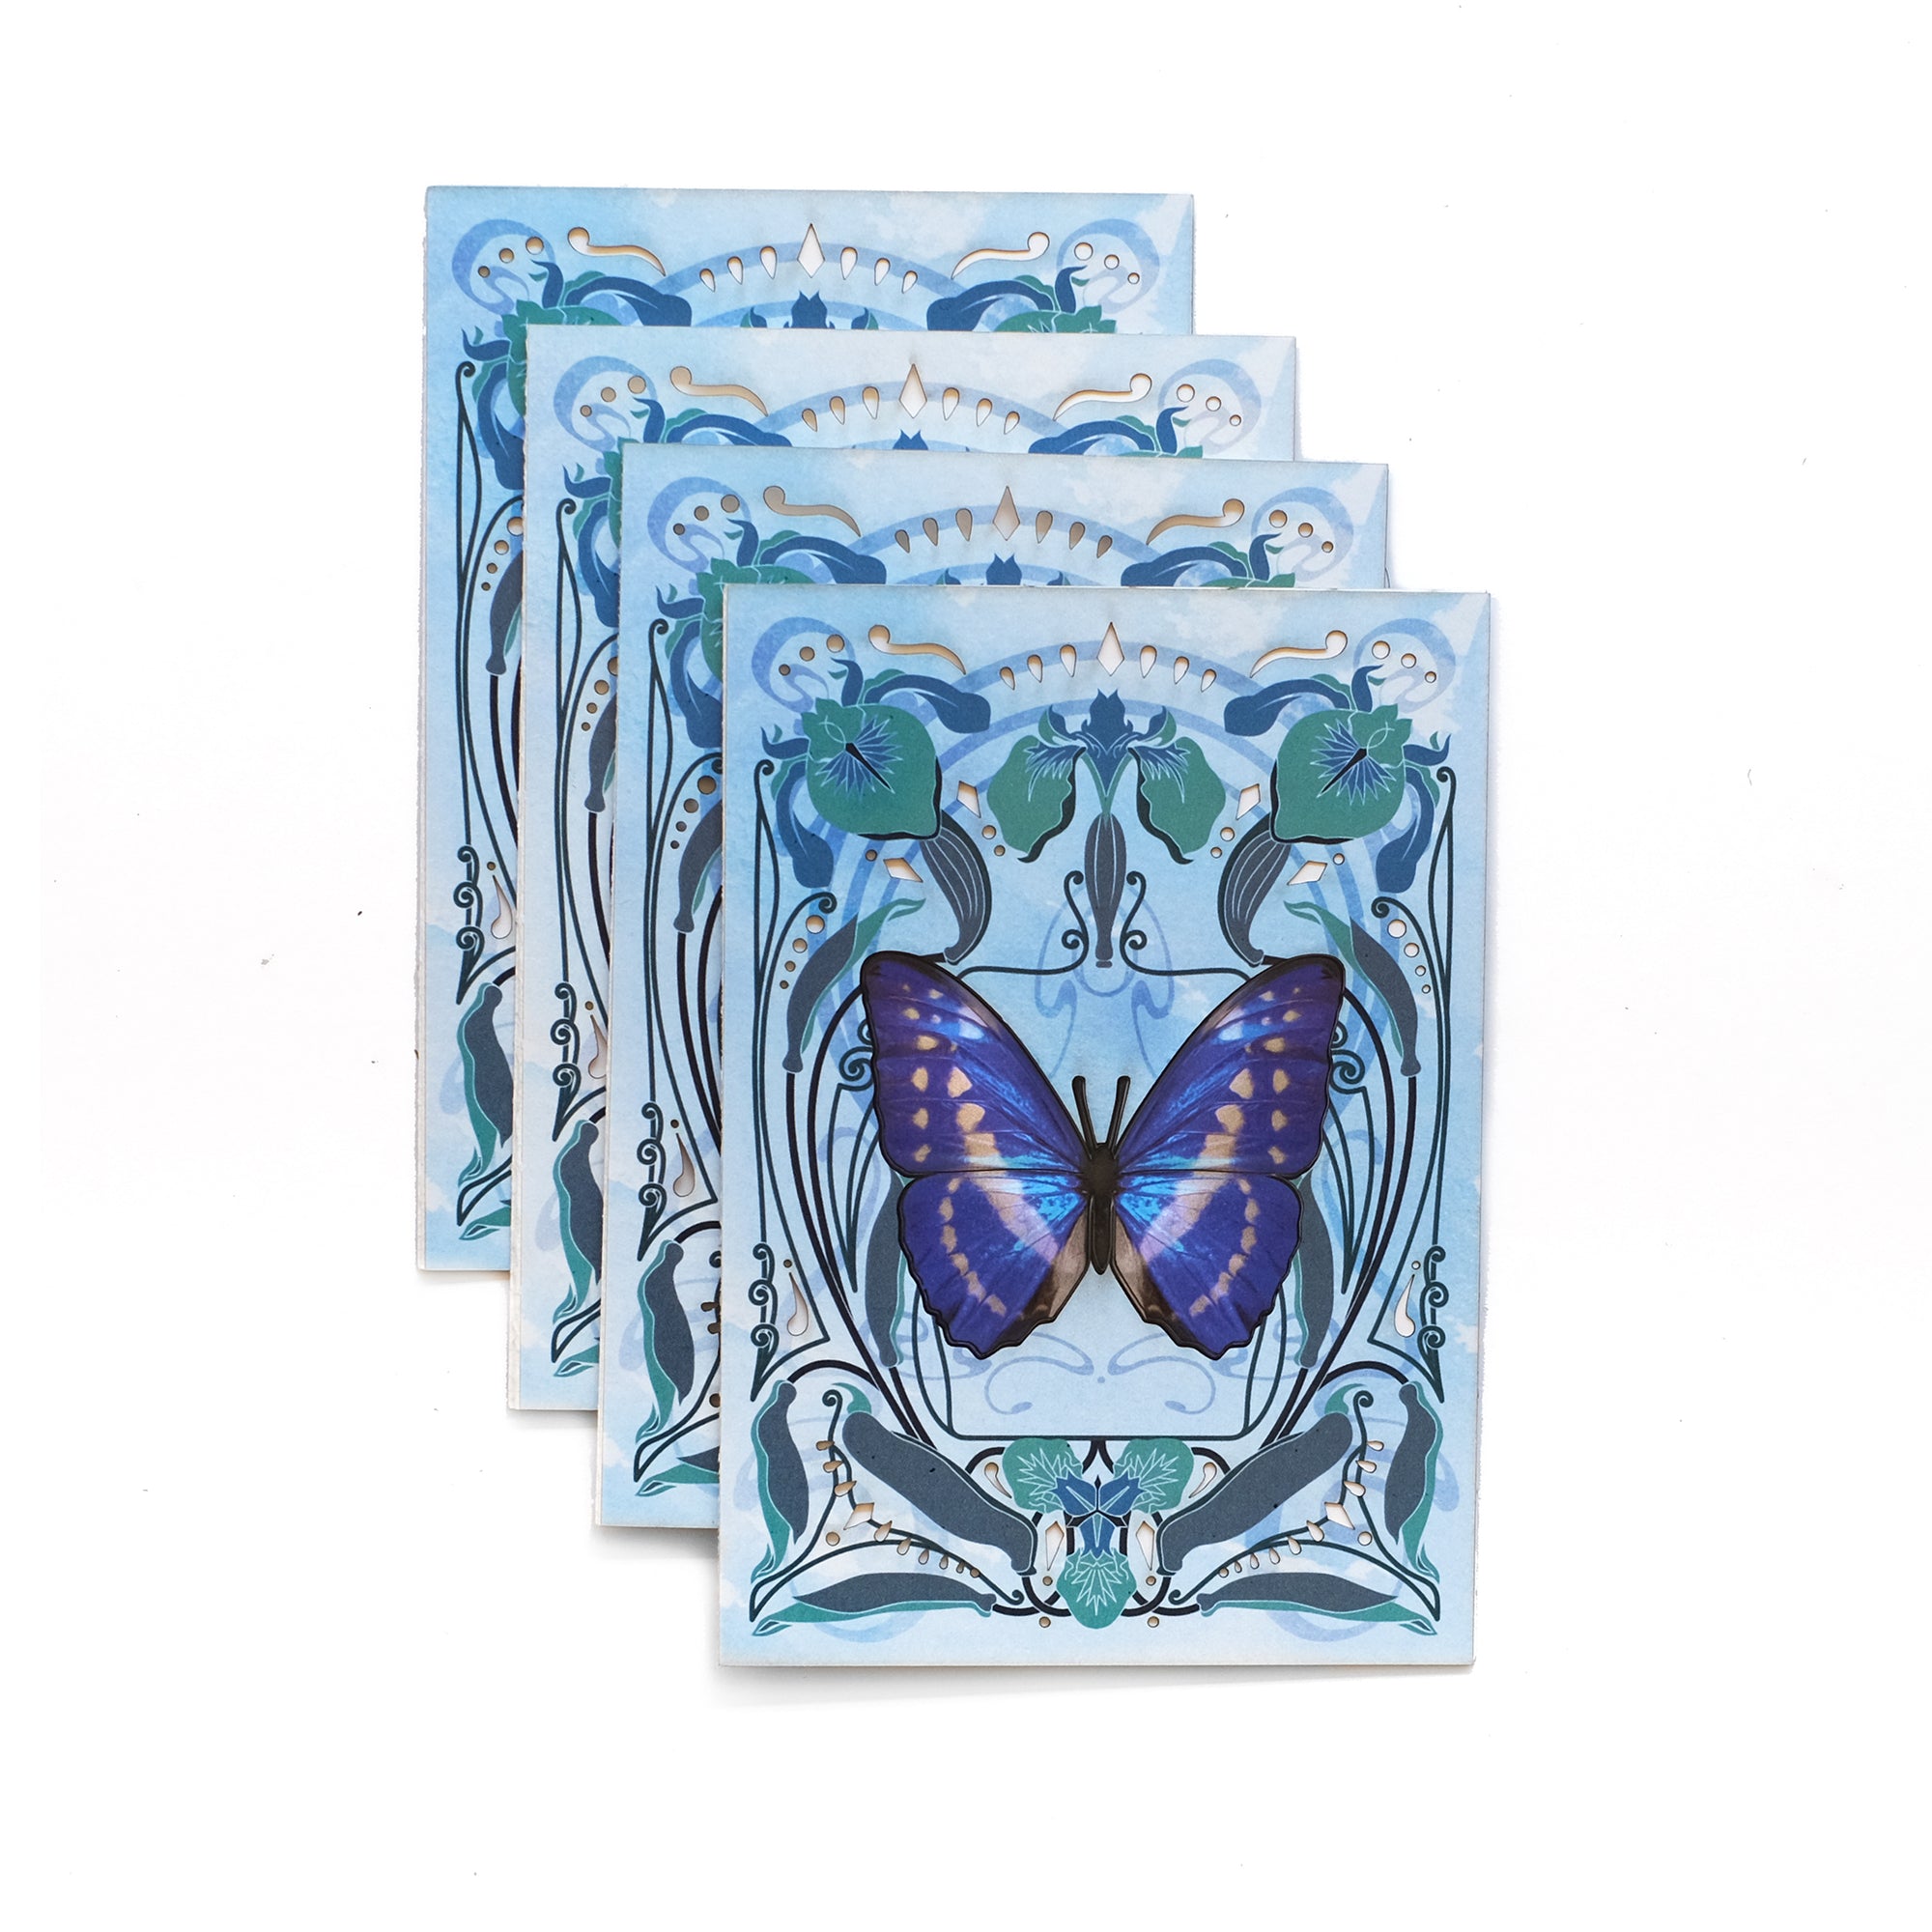 White & Blue Morpho Butterfly 'Pop-Out' Greeting Card - Set of 4 - Reseller Wholesale